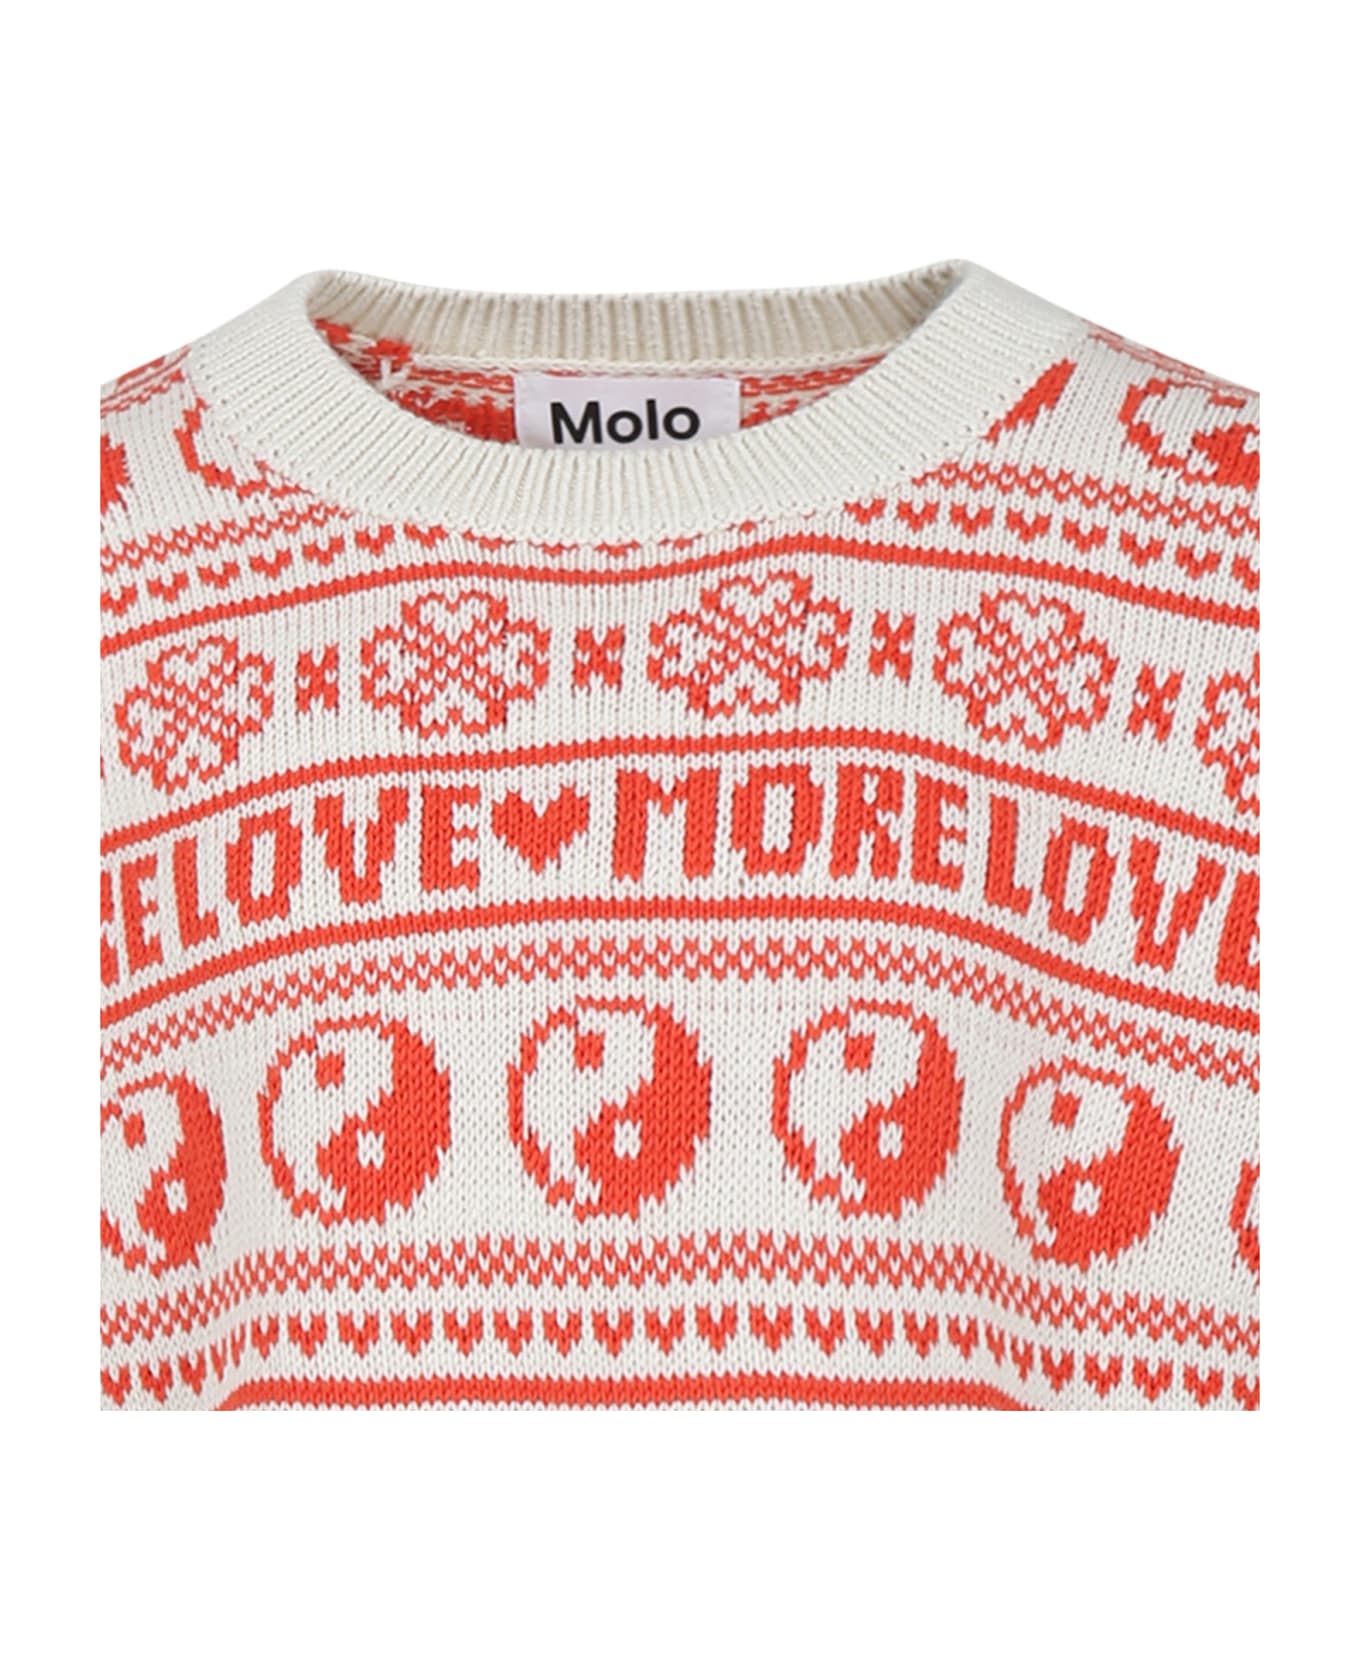 Molo Ivory Sweater For Girl With Jacquard Pattern - Multicolor ニットウェア＆スウェットシャツ